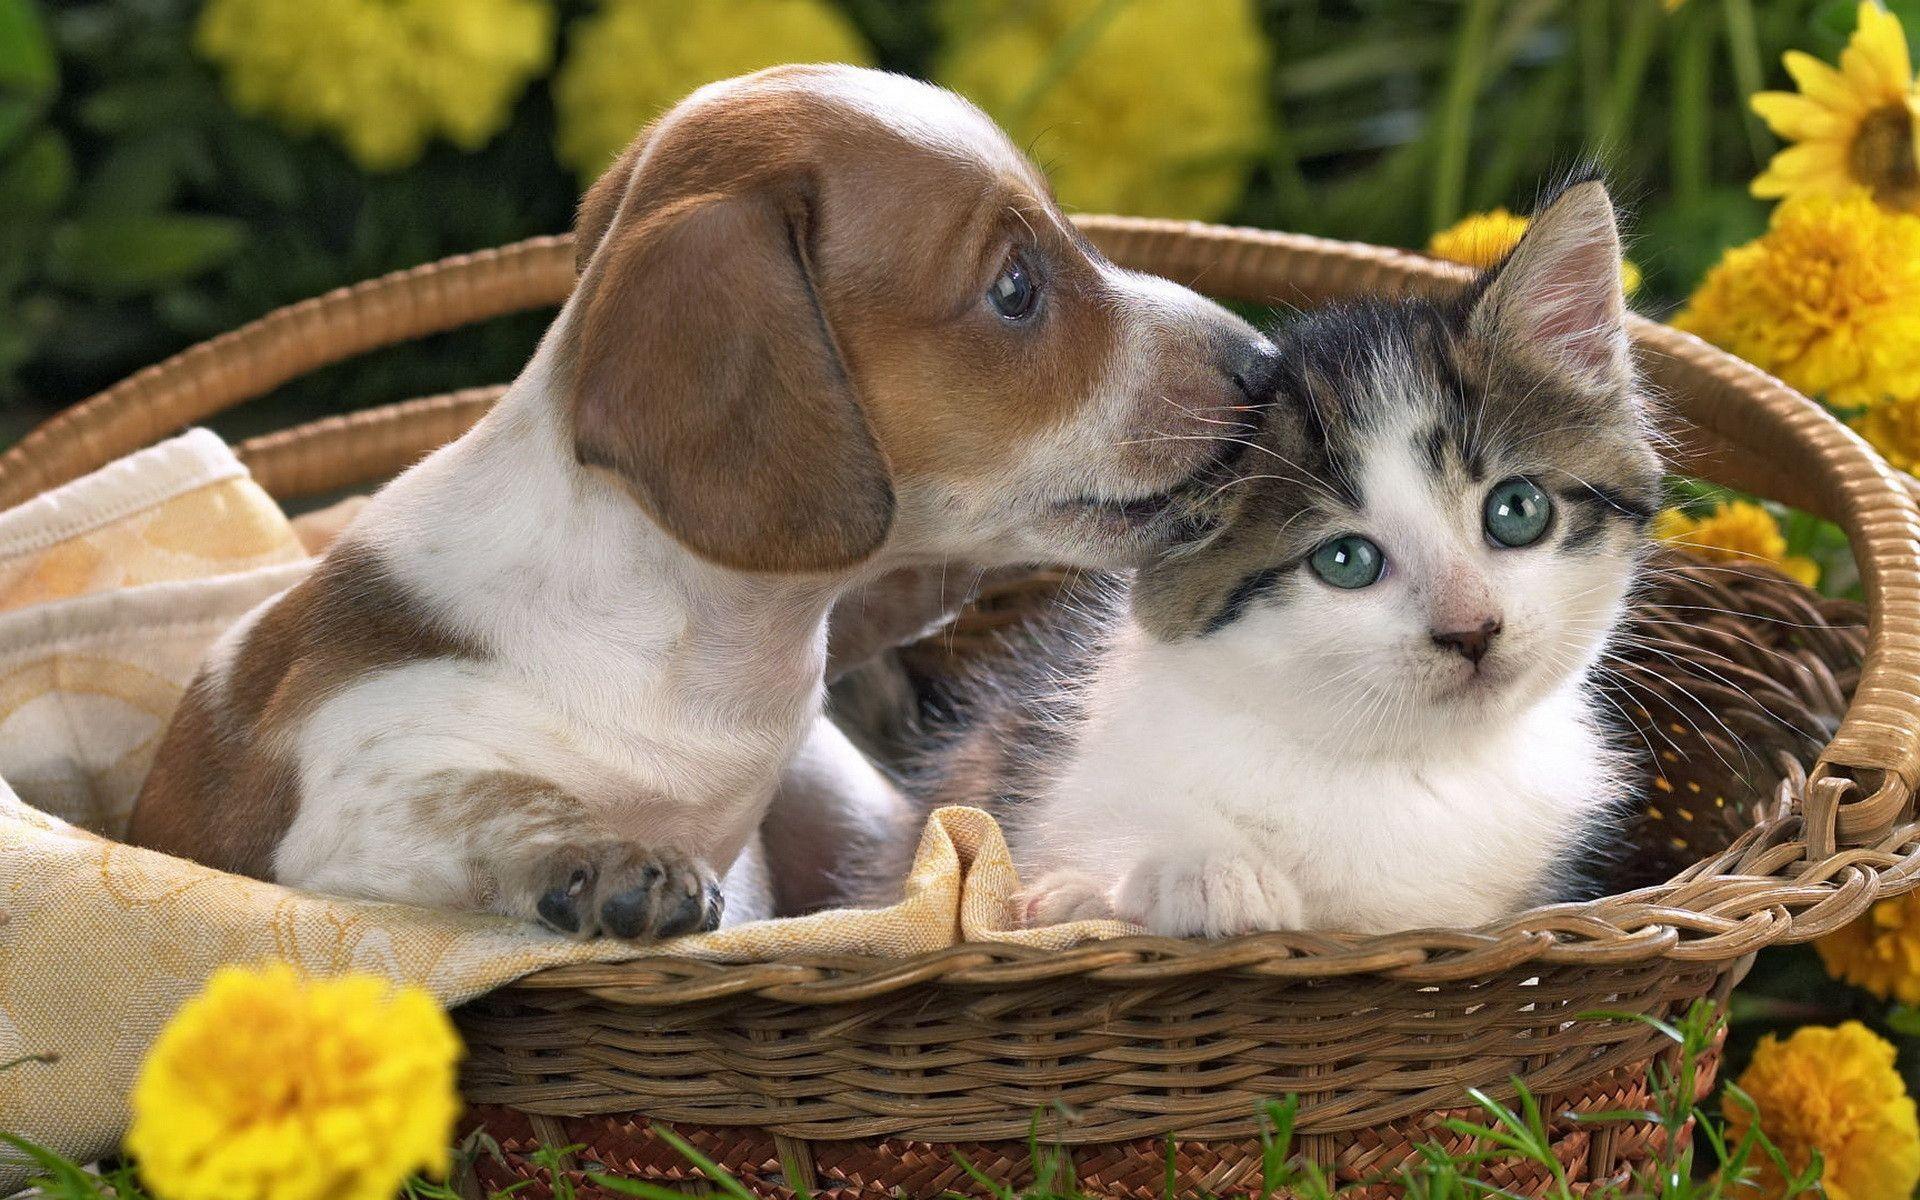 Puppy and kitten wallpaper and image, picture, photo